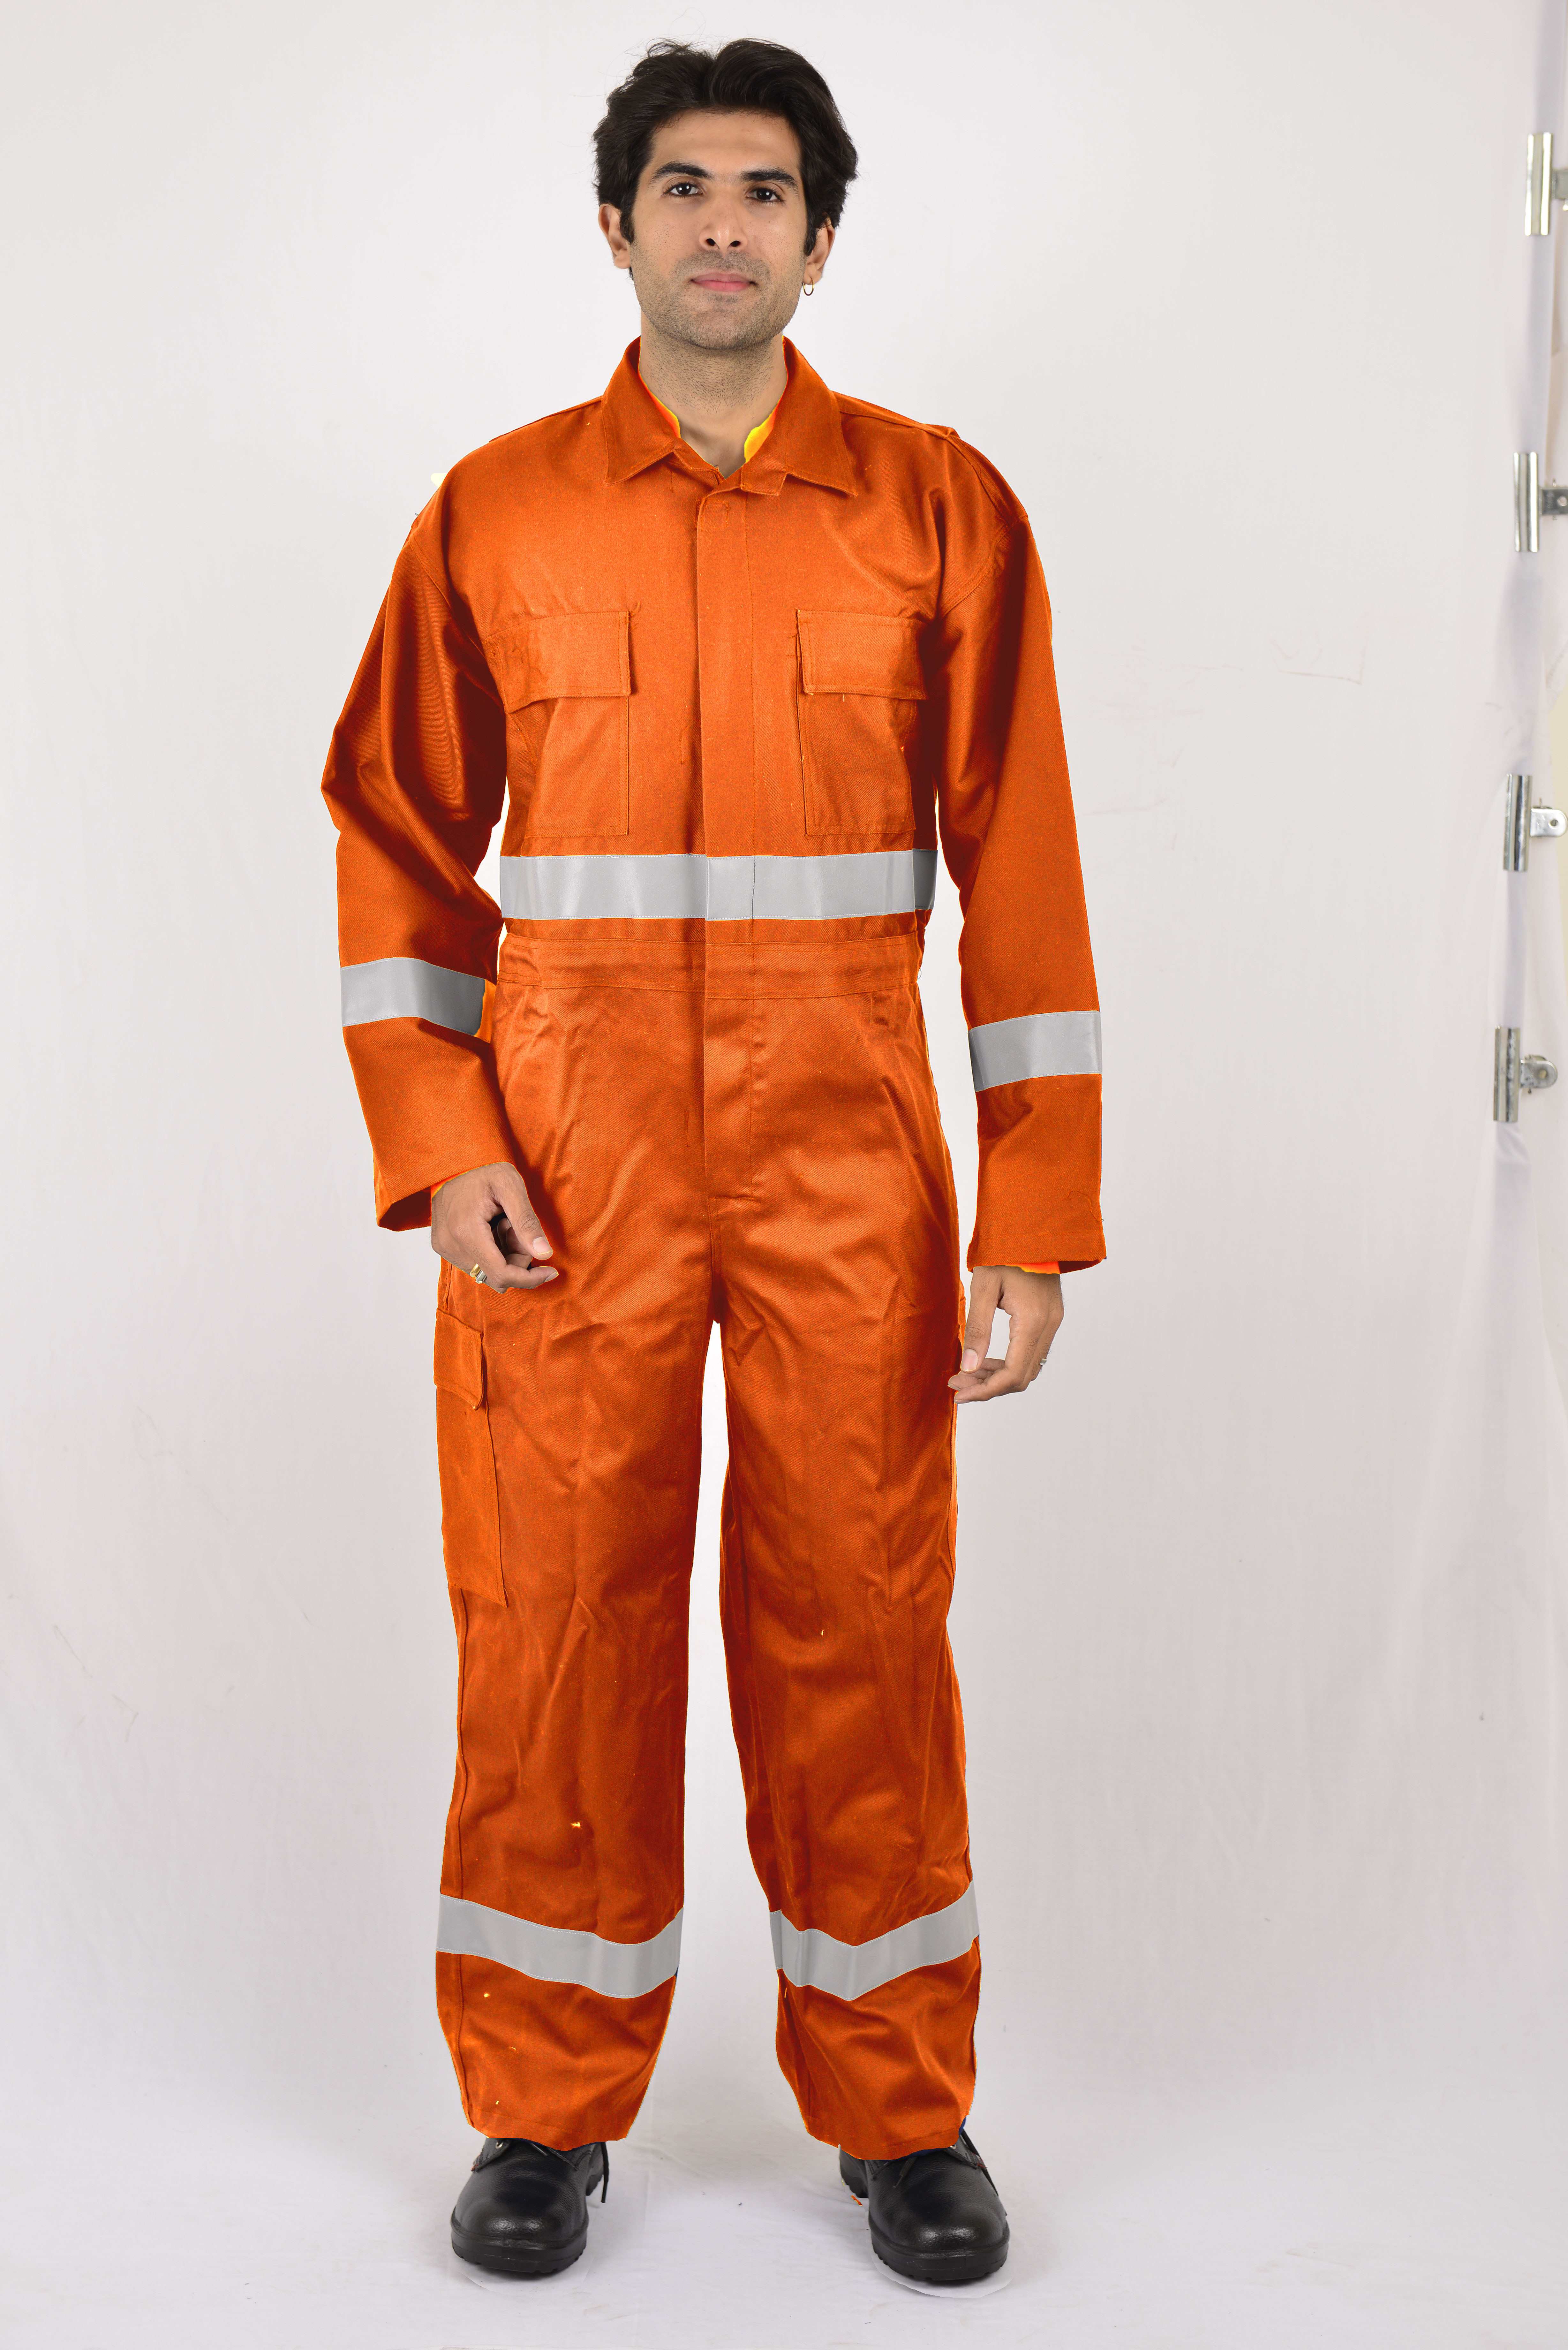 Boiler Suits - 100% Cotton coverall or Jacket and Trouser or Coat